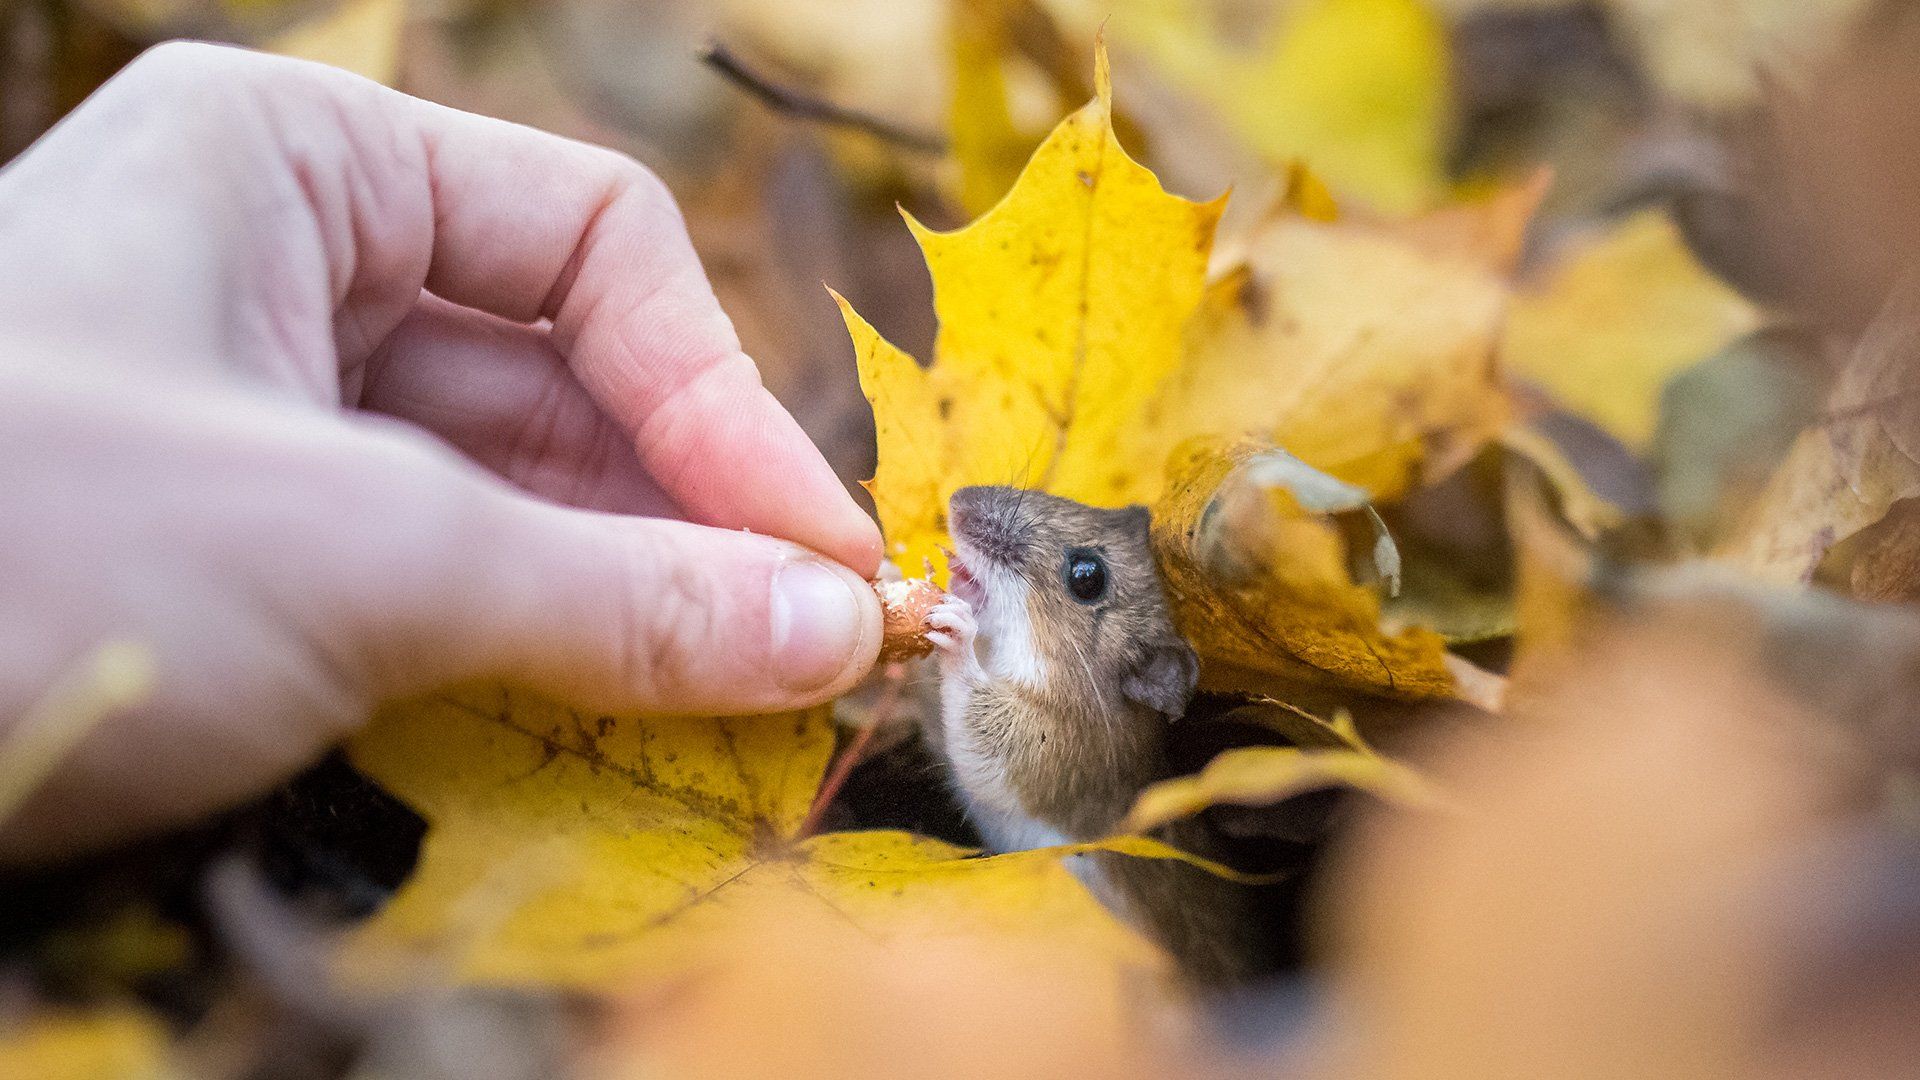 A small mouse surrounded by autumn leaves on the ground takes a nut from a man's hand.